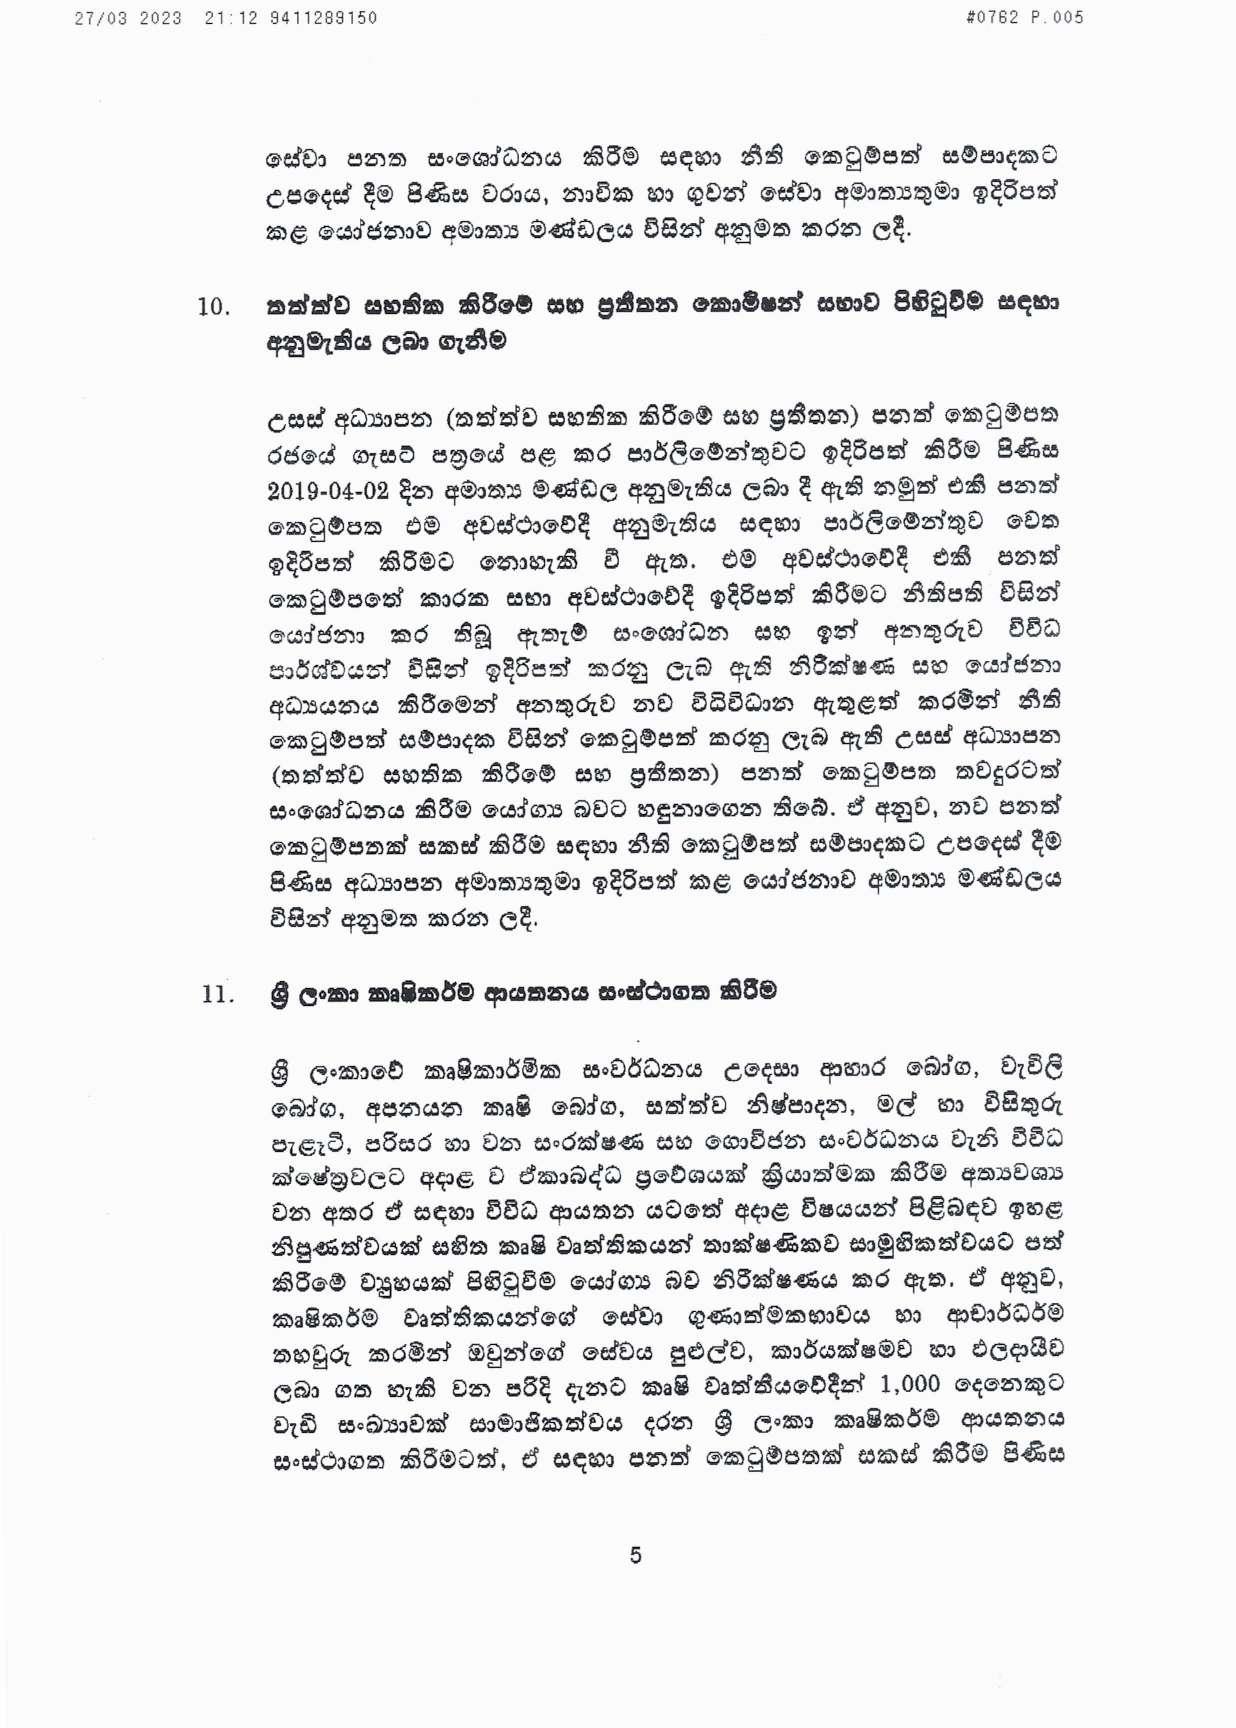 Cabinet Decision on 27.03.2023 page 005